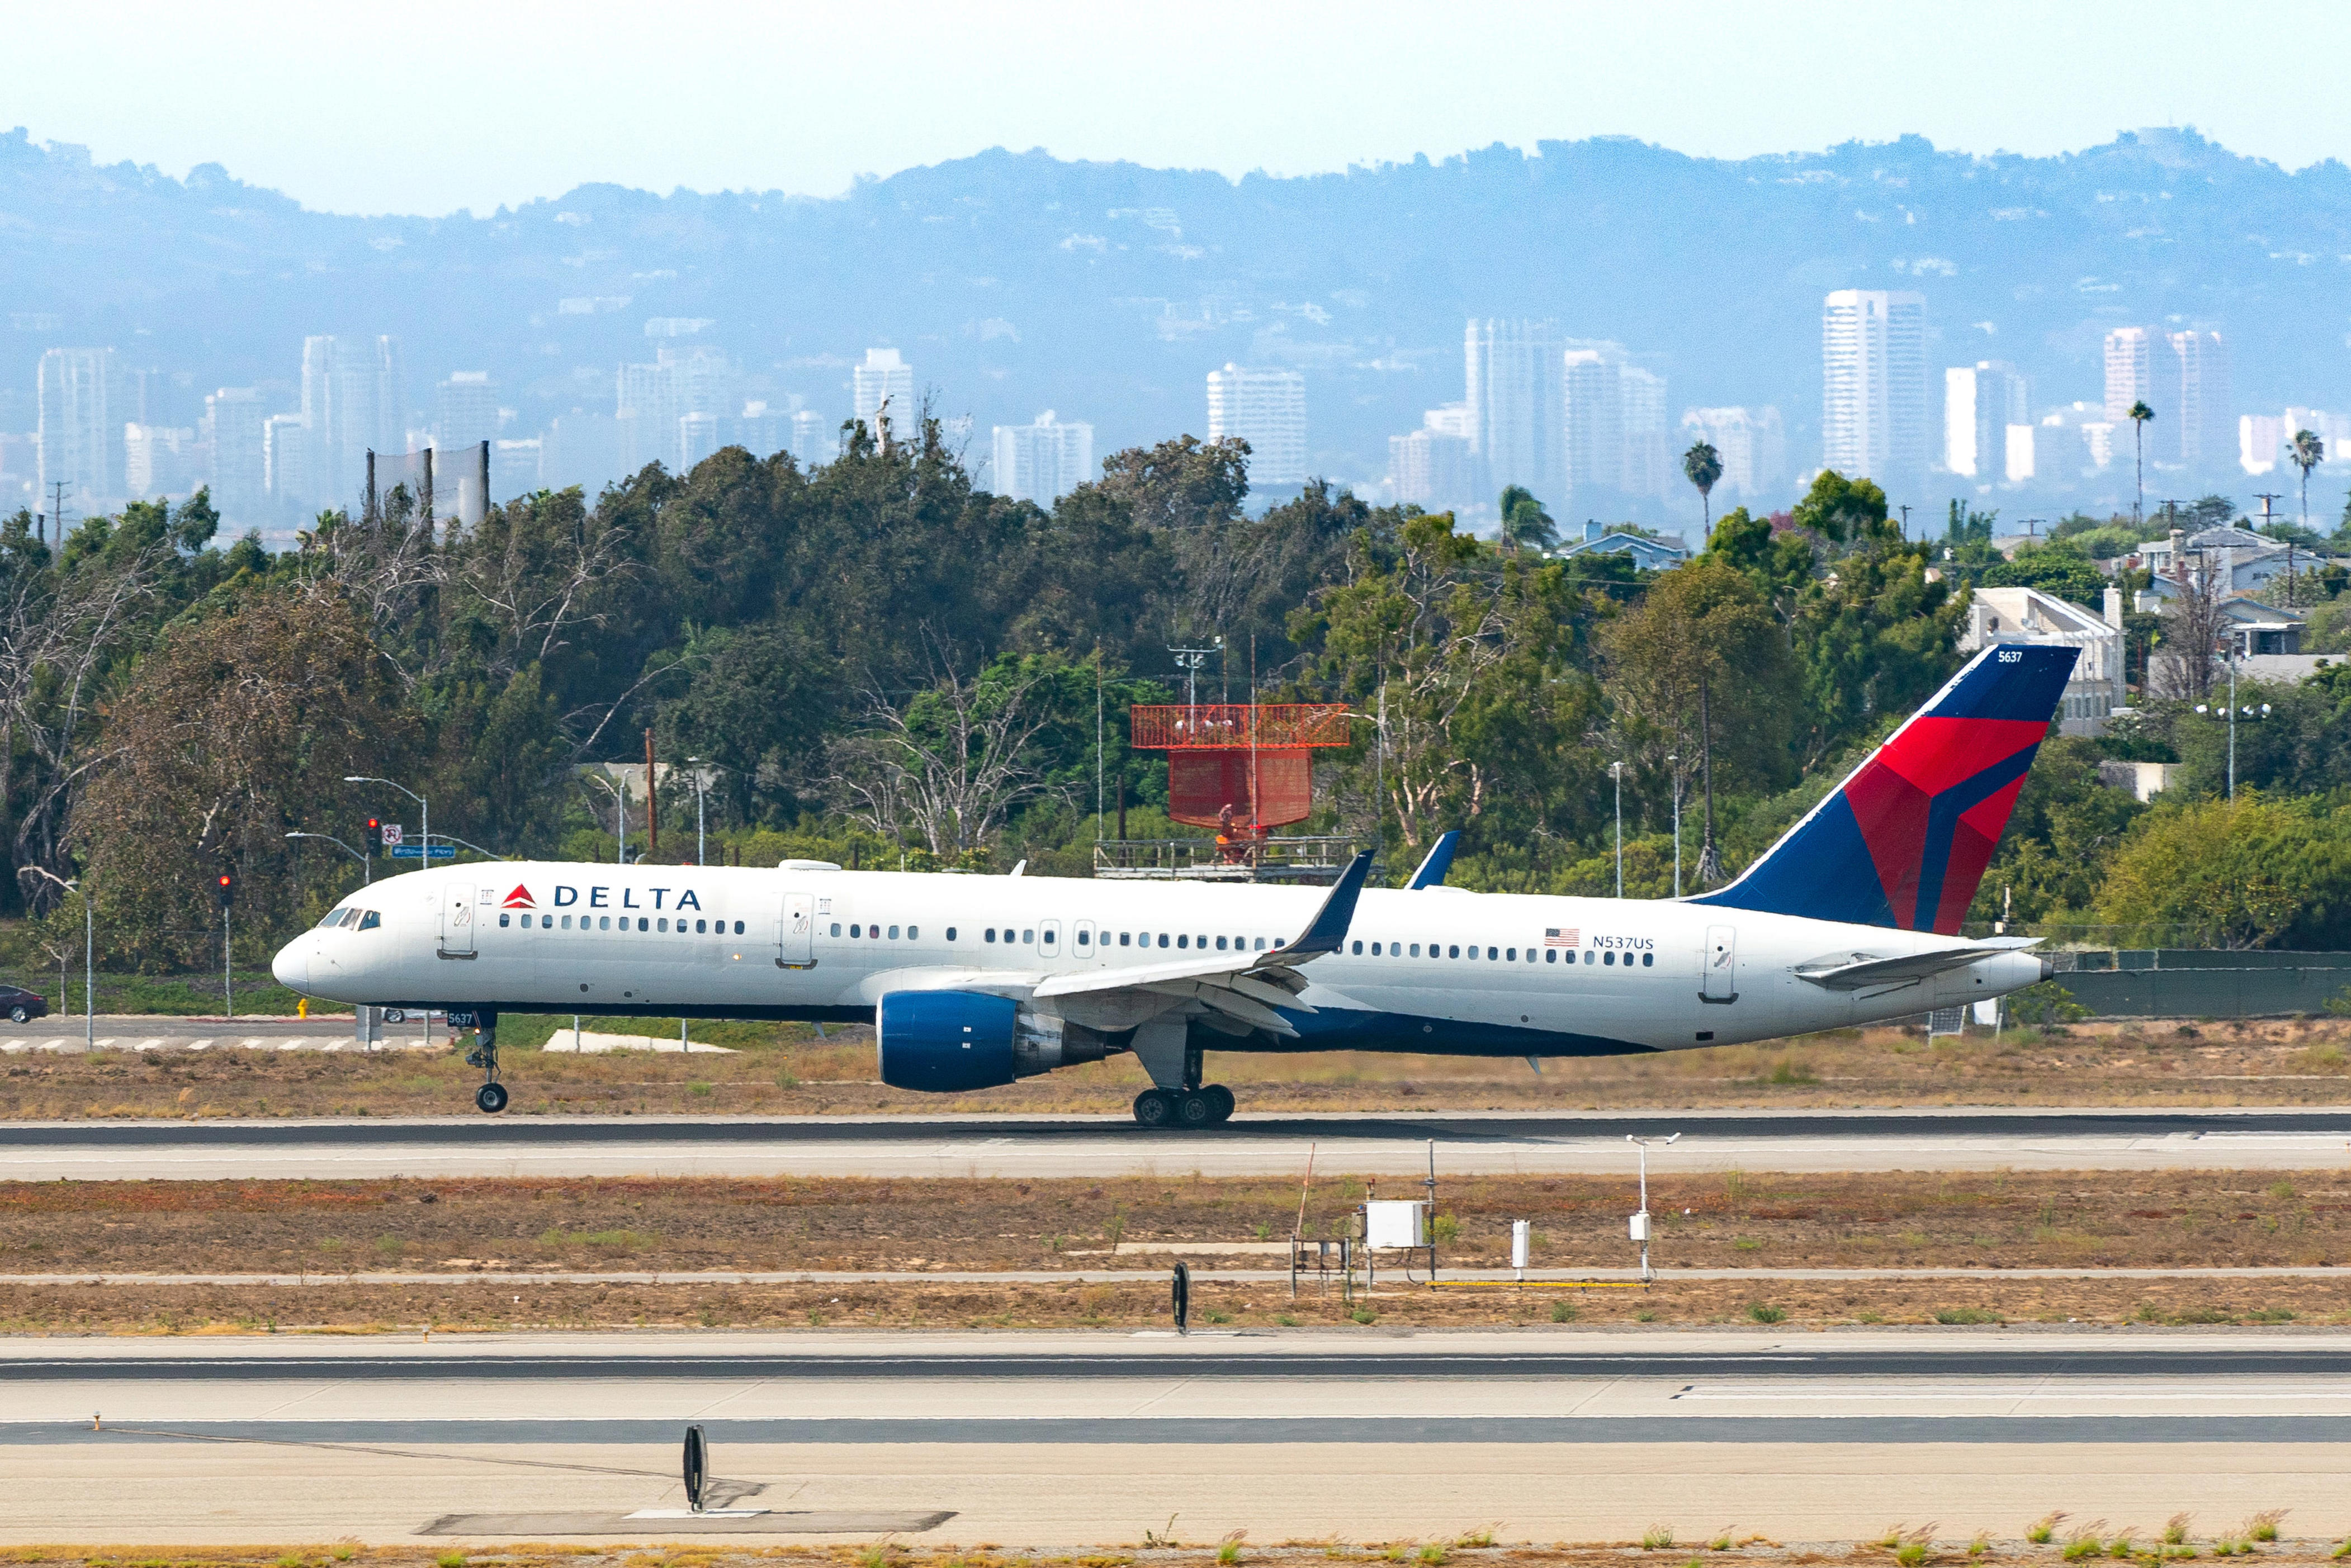 microsoft, a delta boeing 767 made an emergency landing after its exit slide fell off midair